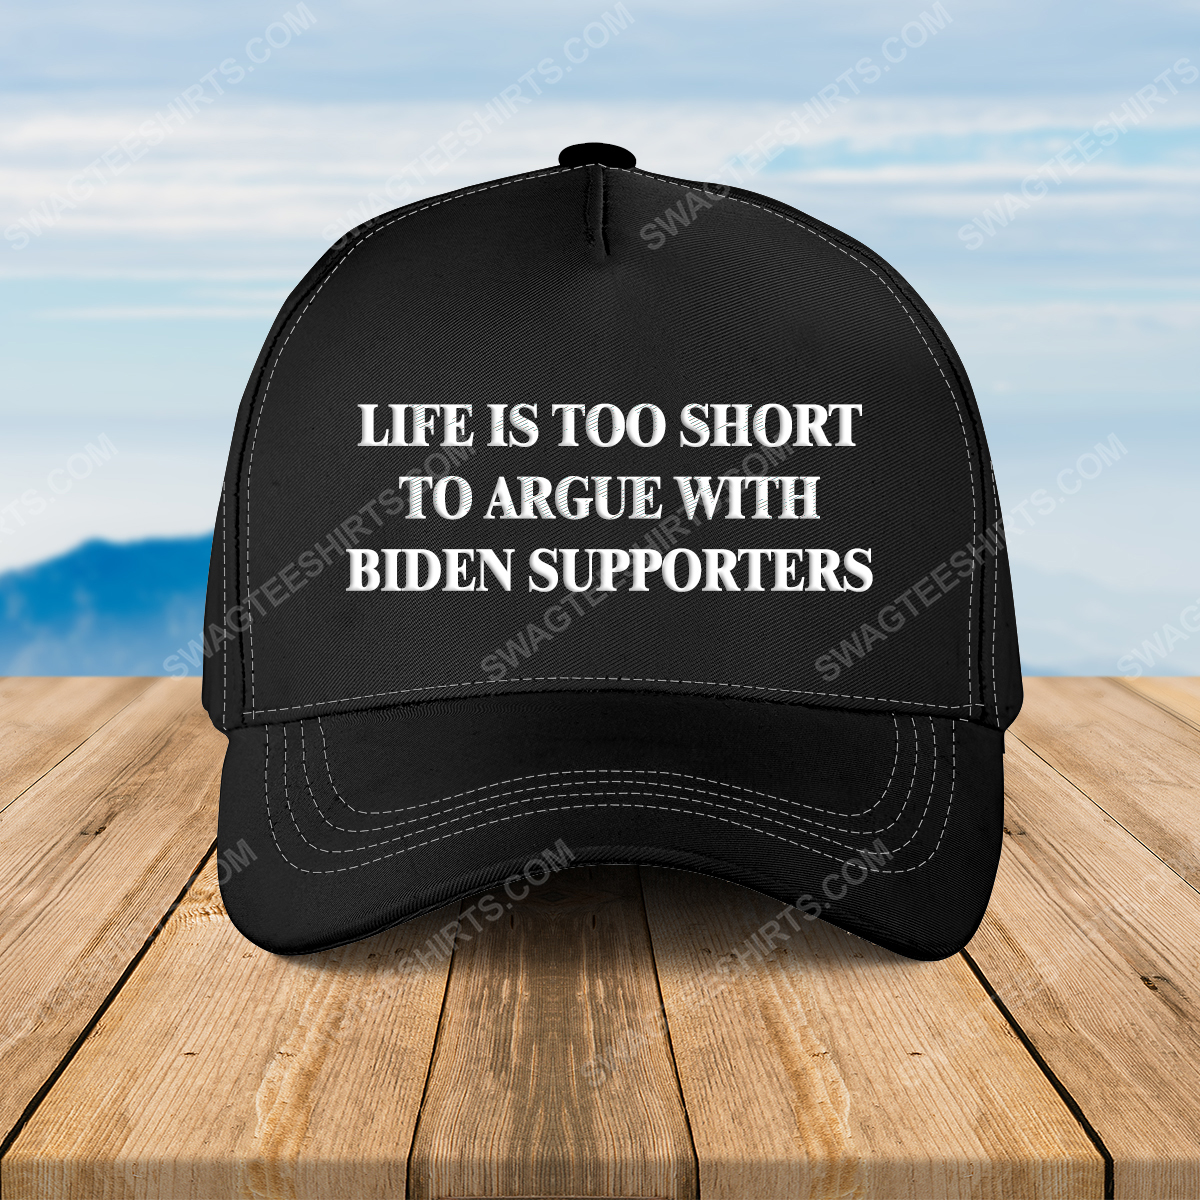 Life is too short to argue with biden supporters full print classic hat 1 - Copy